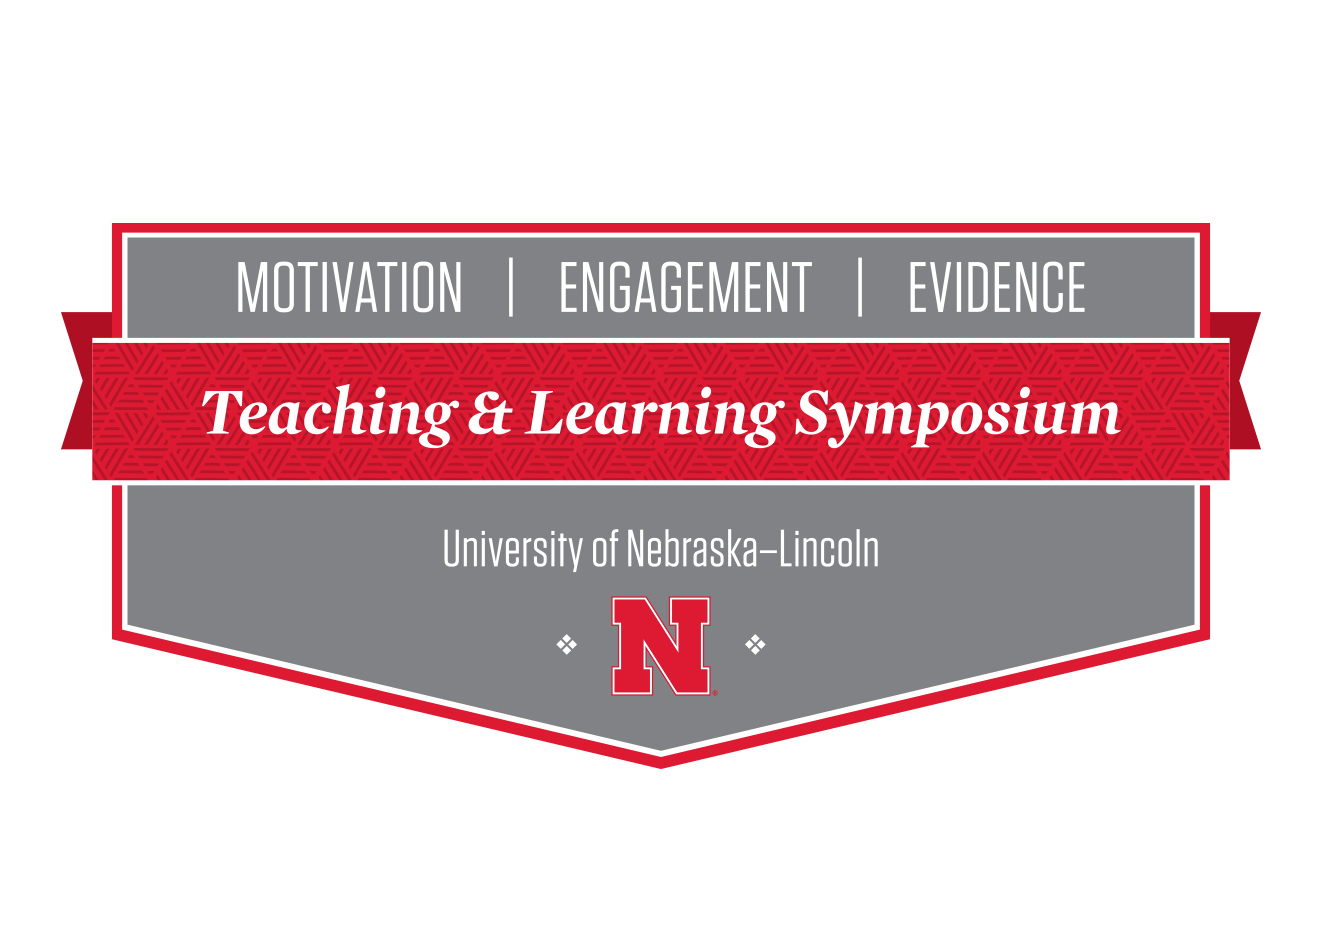 The 2023 symposium will be held on Nov. 17 from 7:30 a.m. - 4:30 p.m. at the Nebraska East Union.